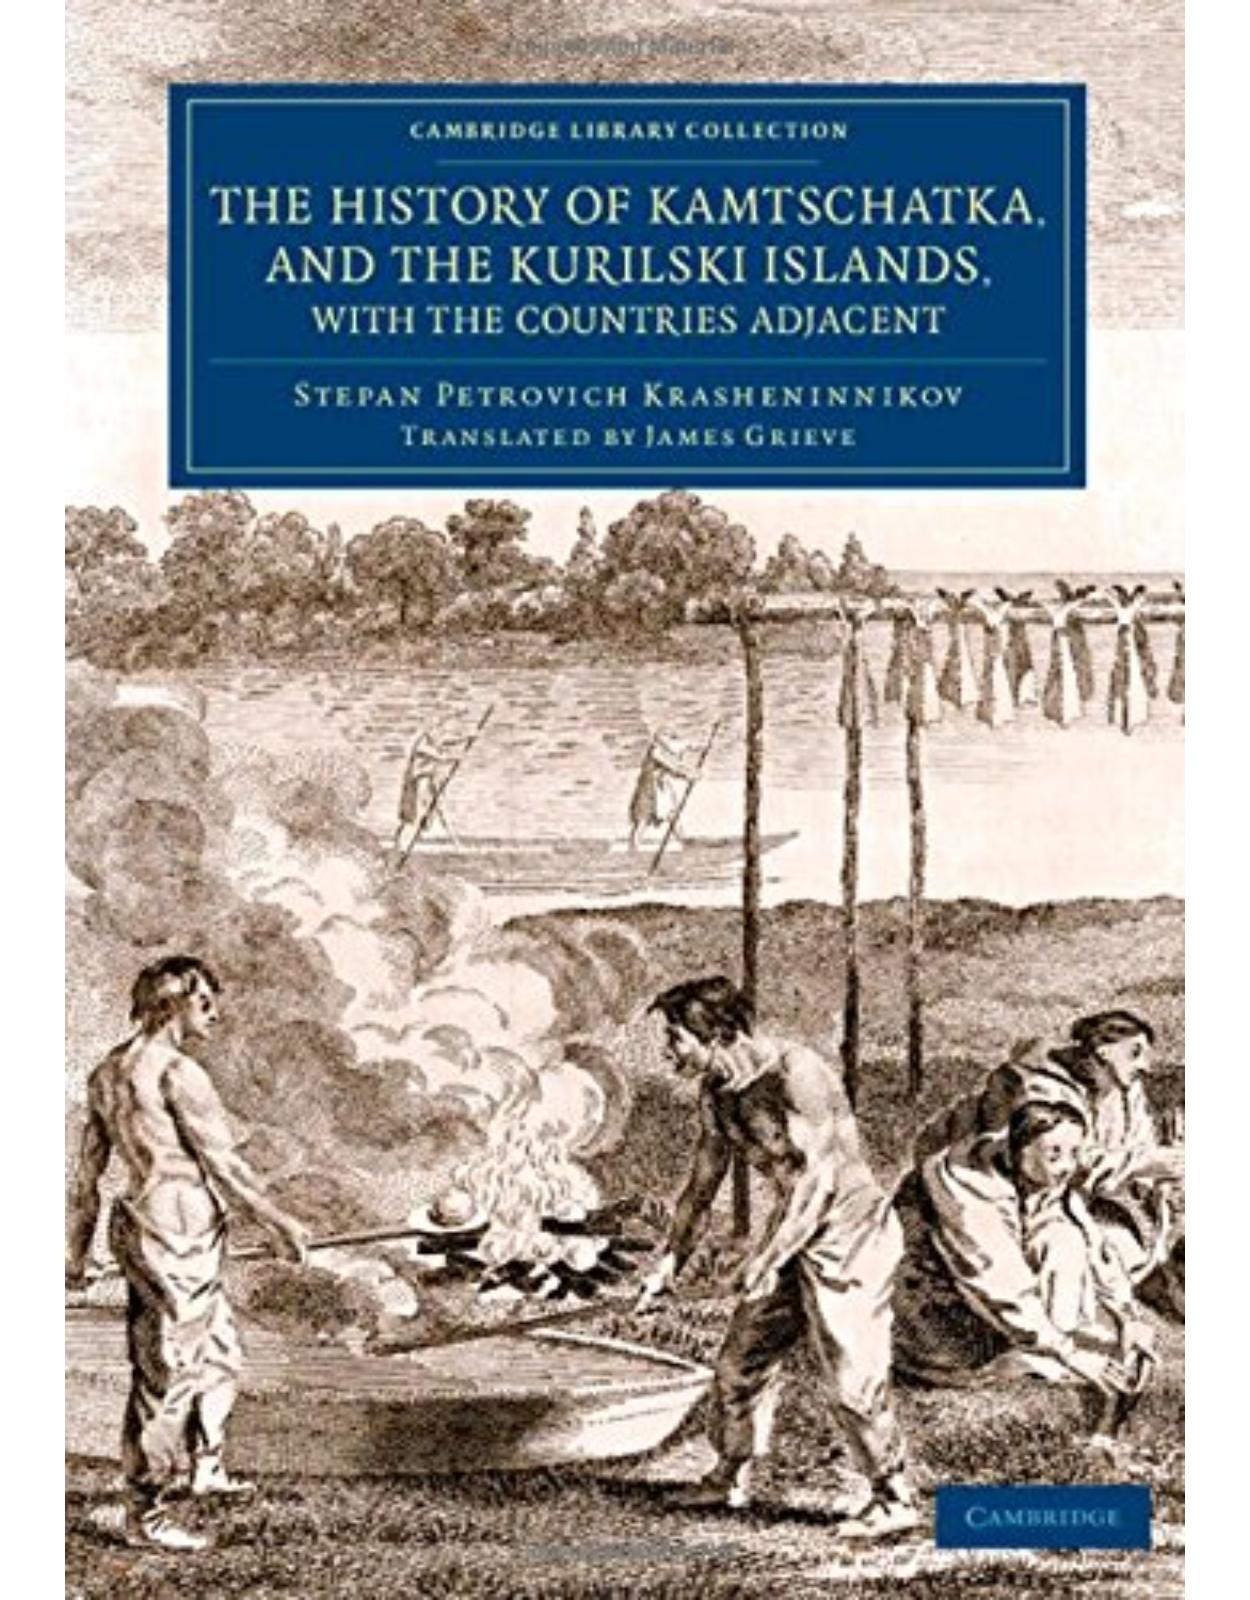 The History of Kamtschatka, and the Kurilski Islands, with the Countries Adjacent (Cambridge Library Collection - Travel and Exploration in Asia)